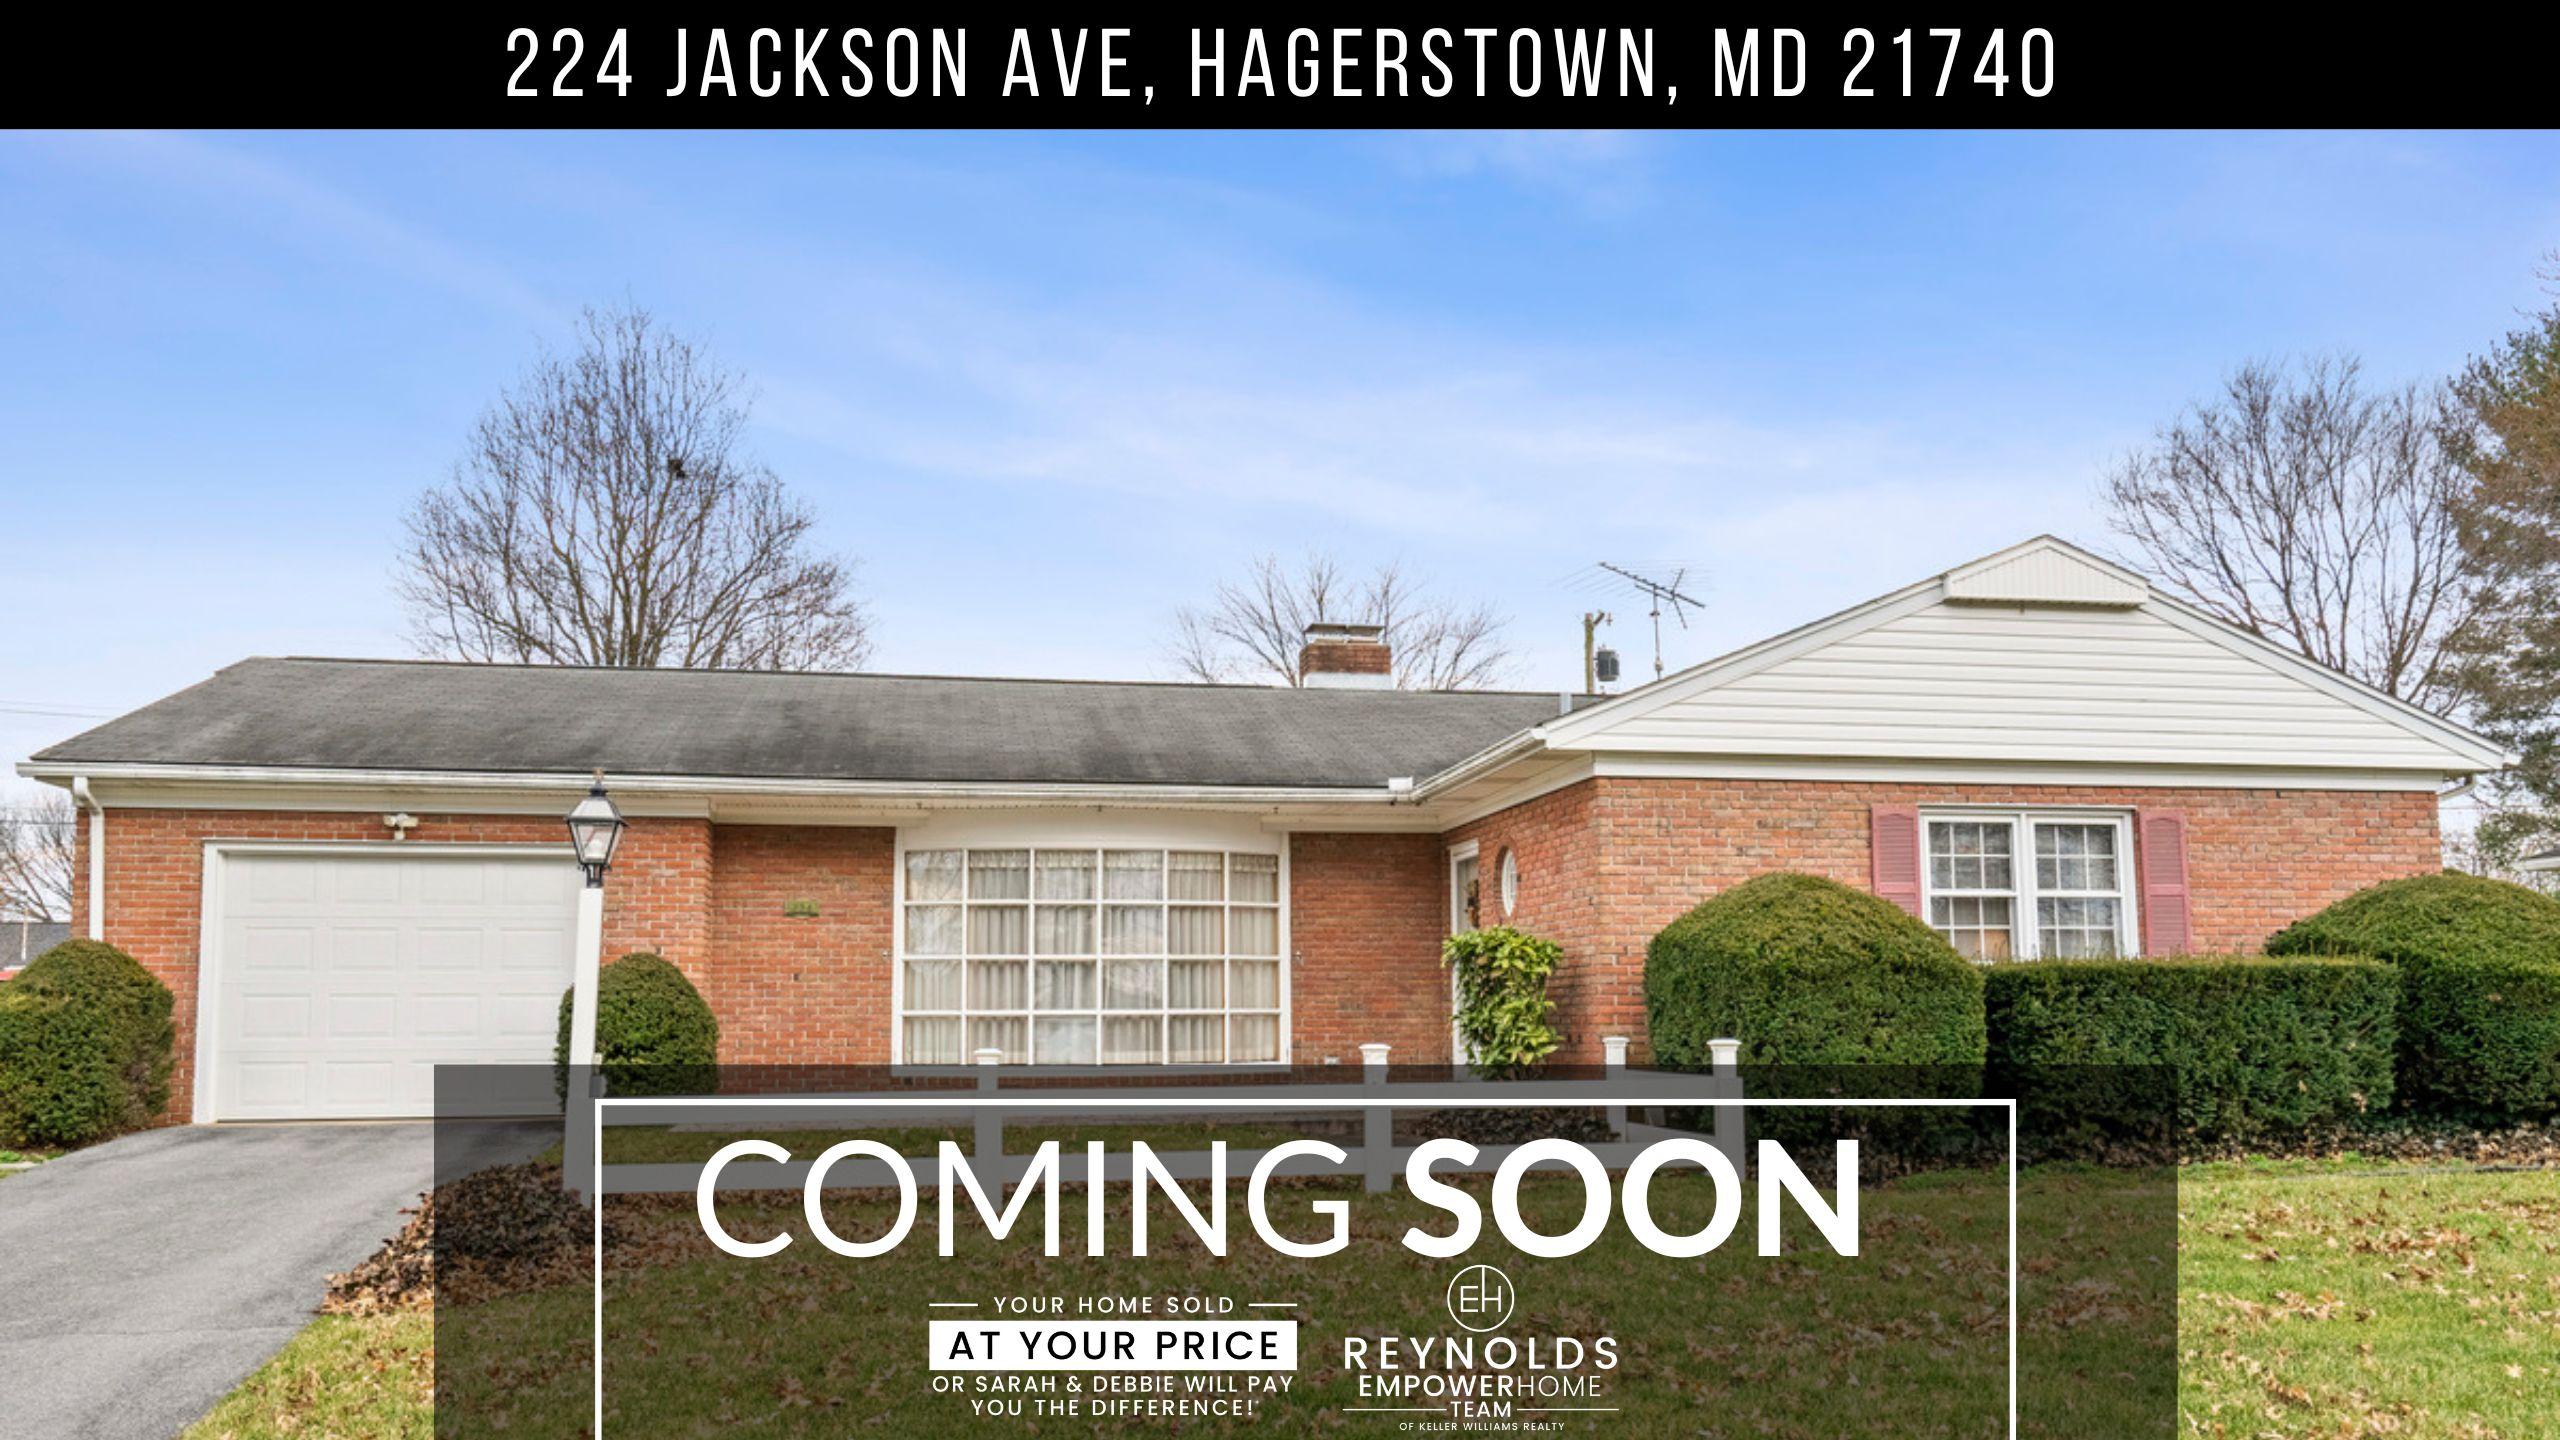 224 Jackson Ave, Hagerstown, MD 21740